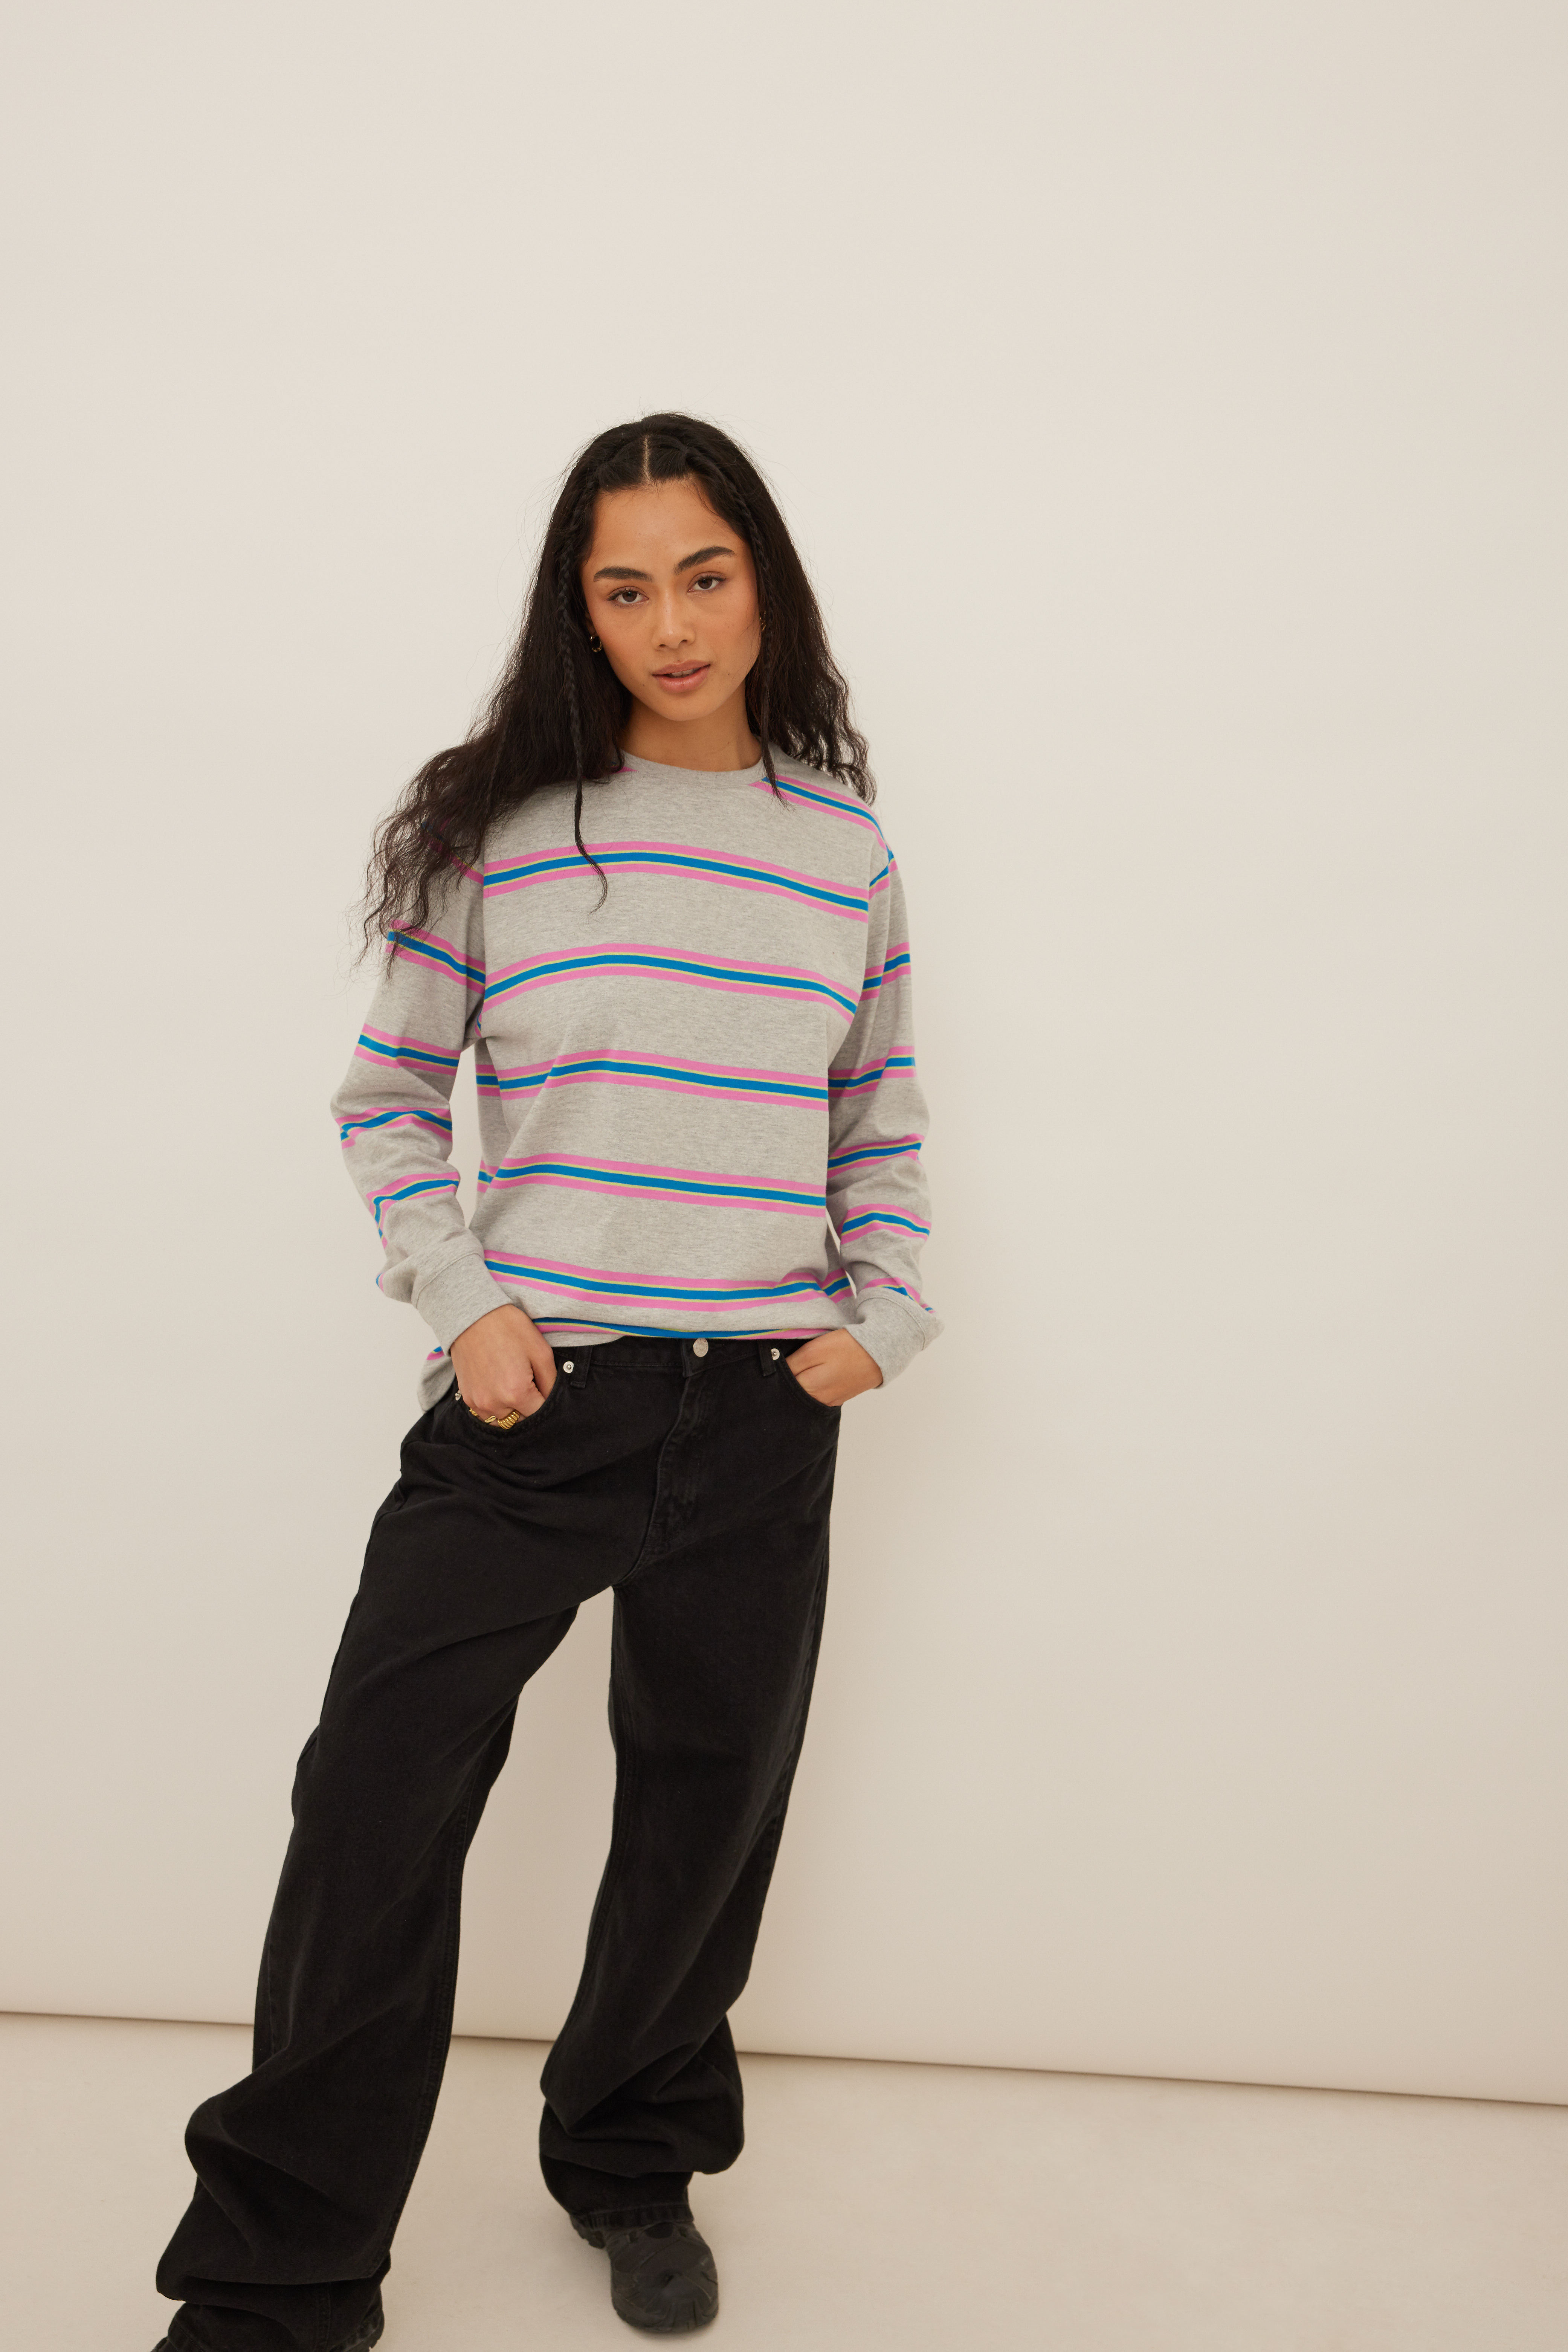 Striped Long Sleeve T-shirt Outfit.